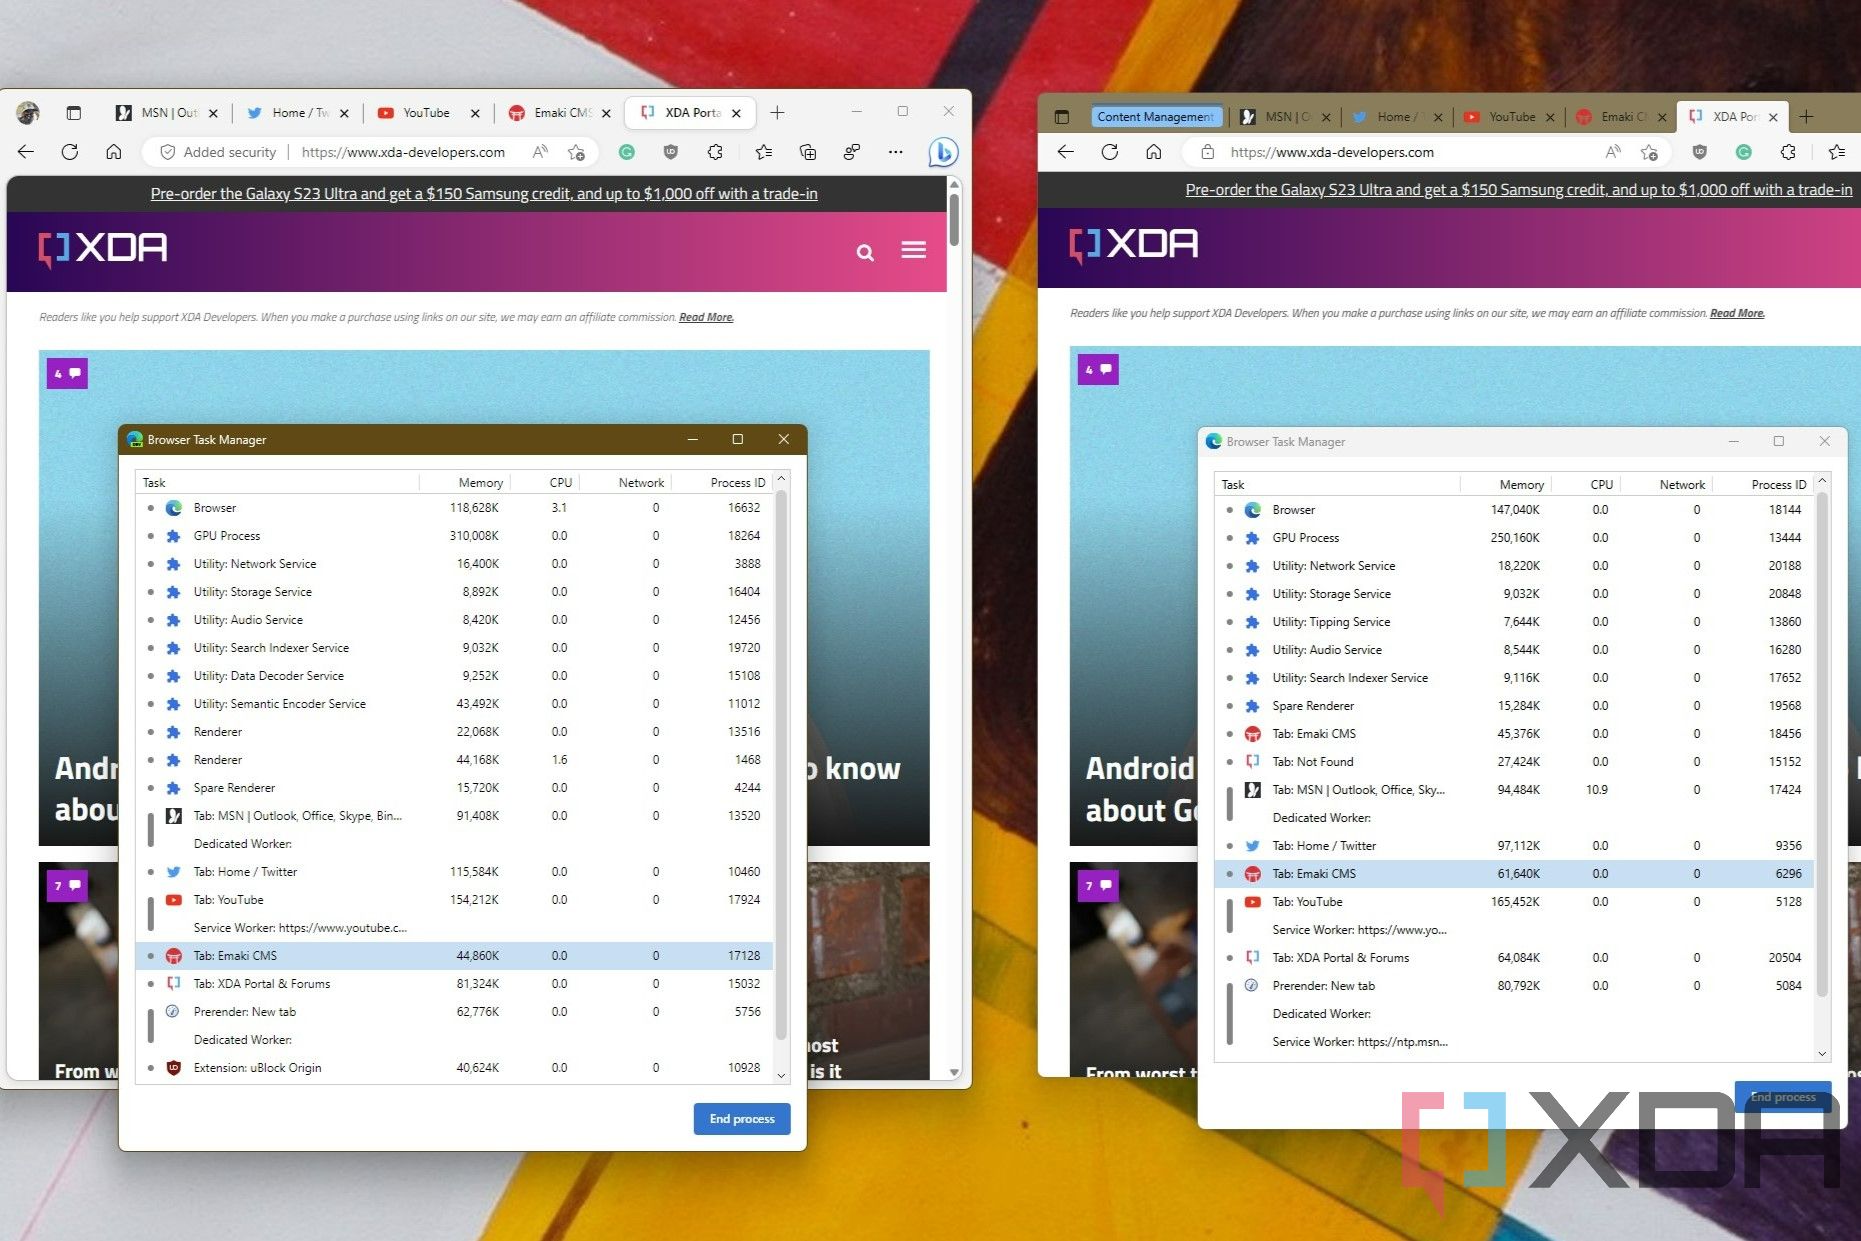 Performance tests with new edge and old edge side by side